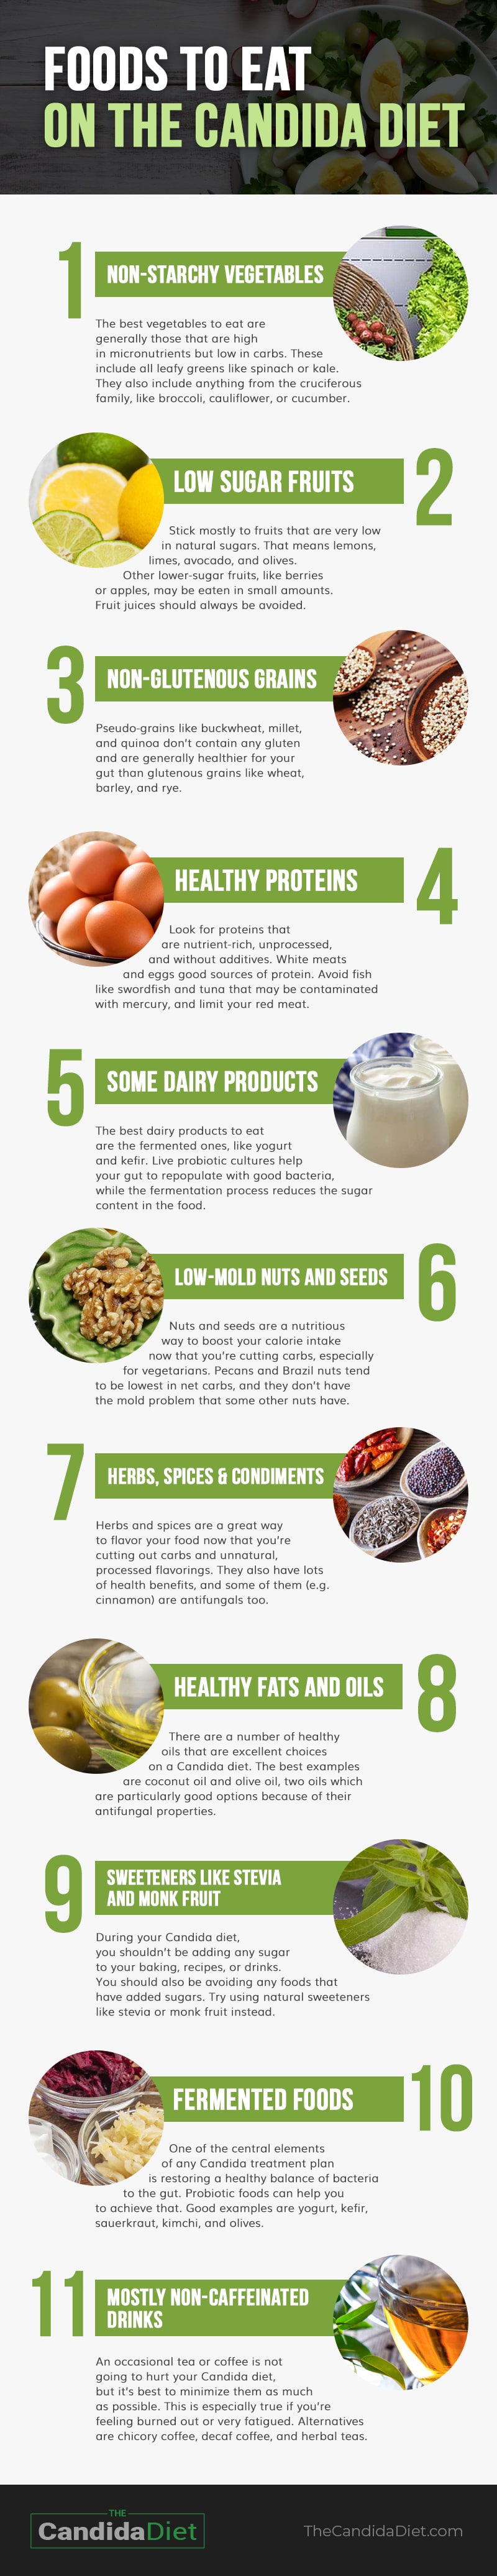 Probiotic Foods for Candida